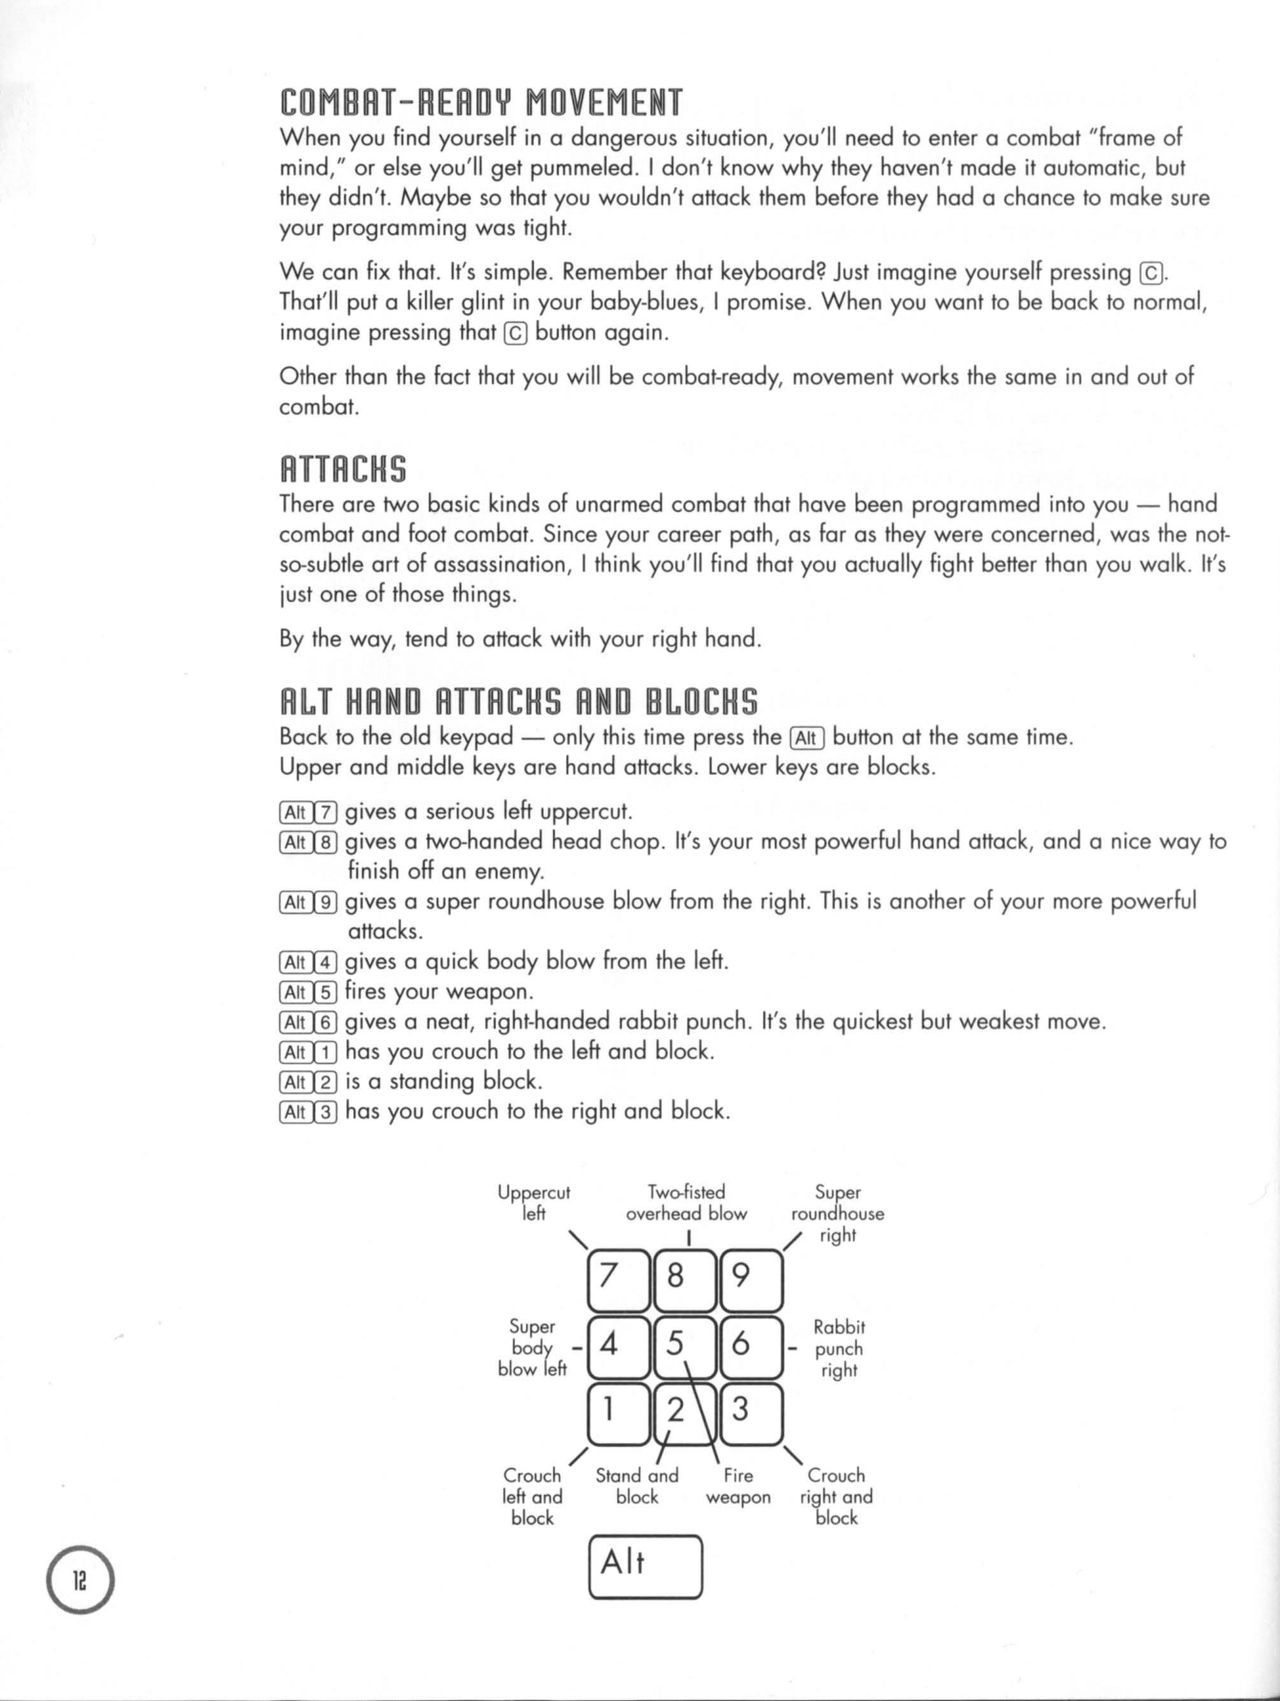 BioForge (PC (DOS/Windows)) Strategy Guide 13